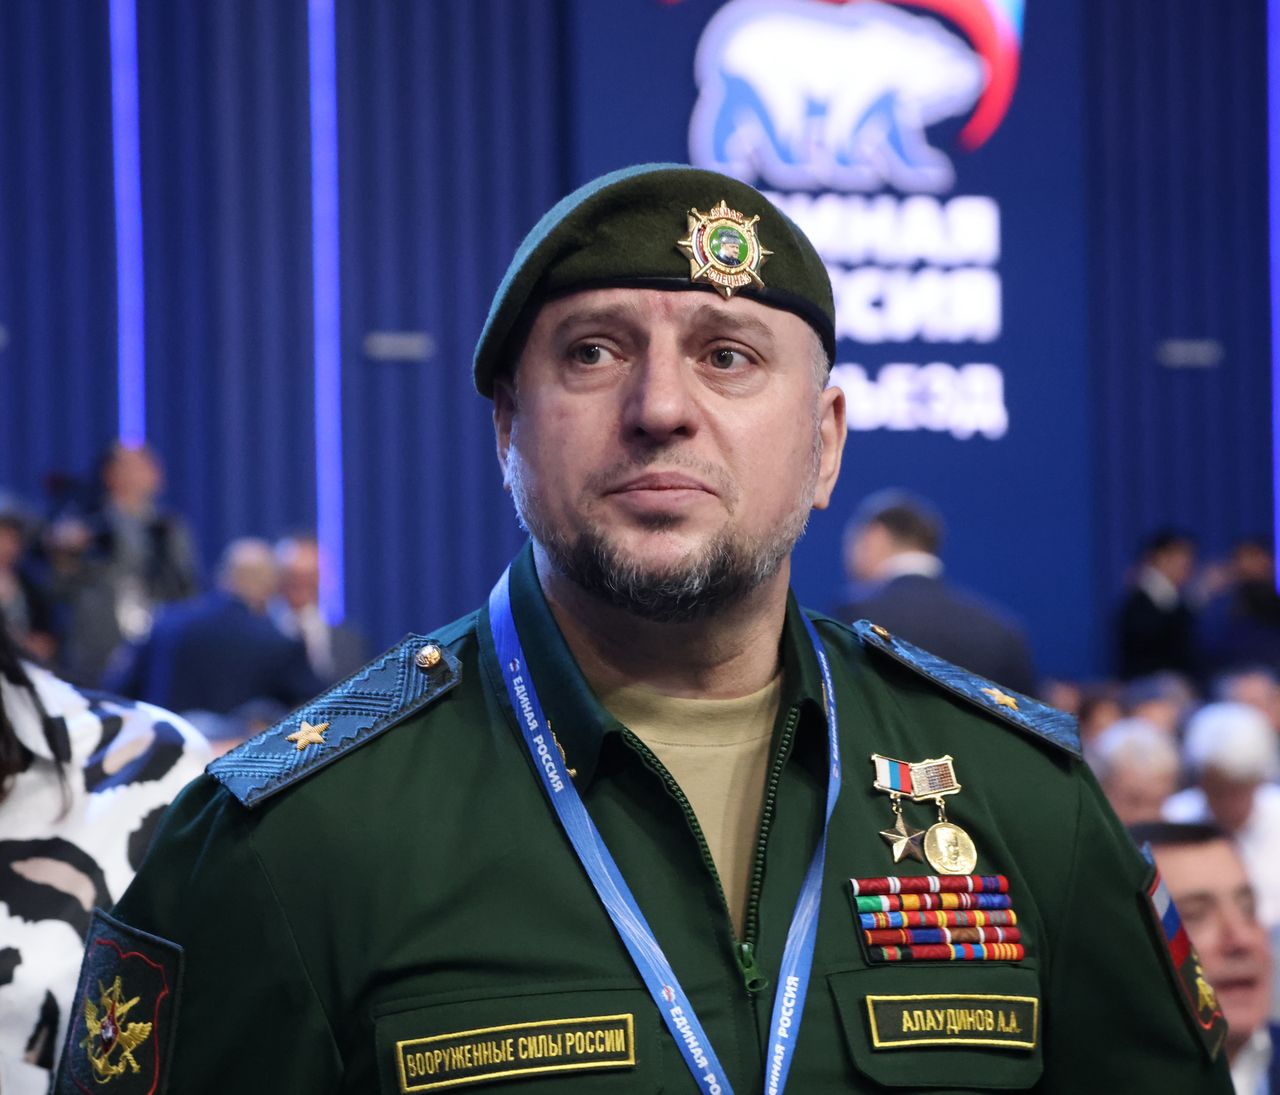 Chechen ally of Kadyrov threatens NATO, vowing 'they will kneel' by 2030